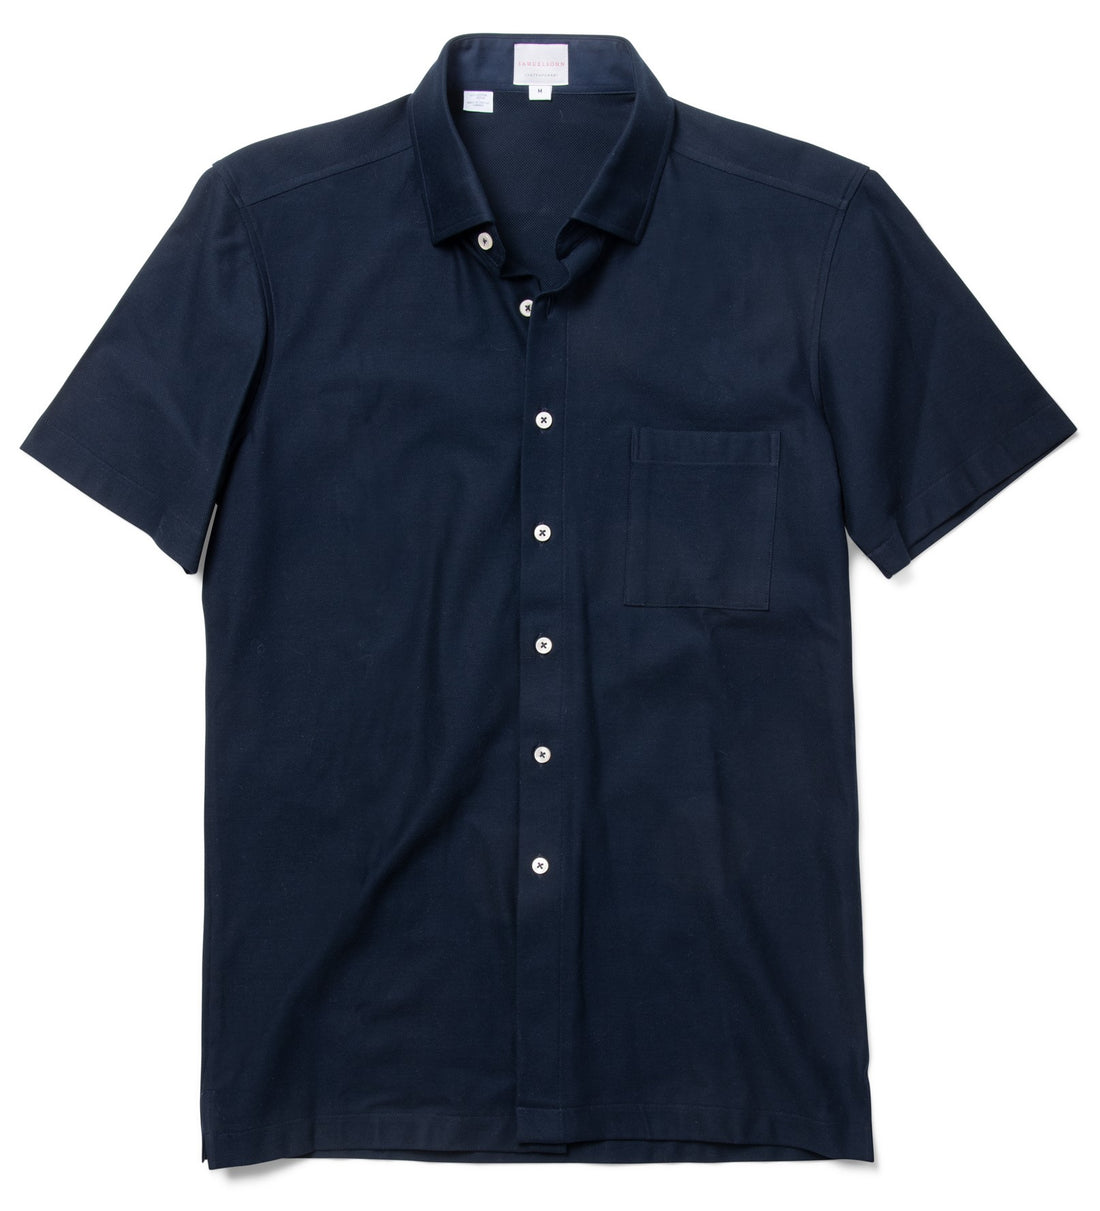 Buy Navy Knit Shirt, Casual Navy Solid Shirts for Men Online